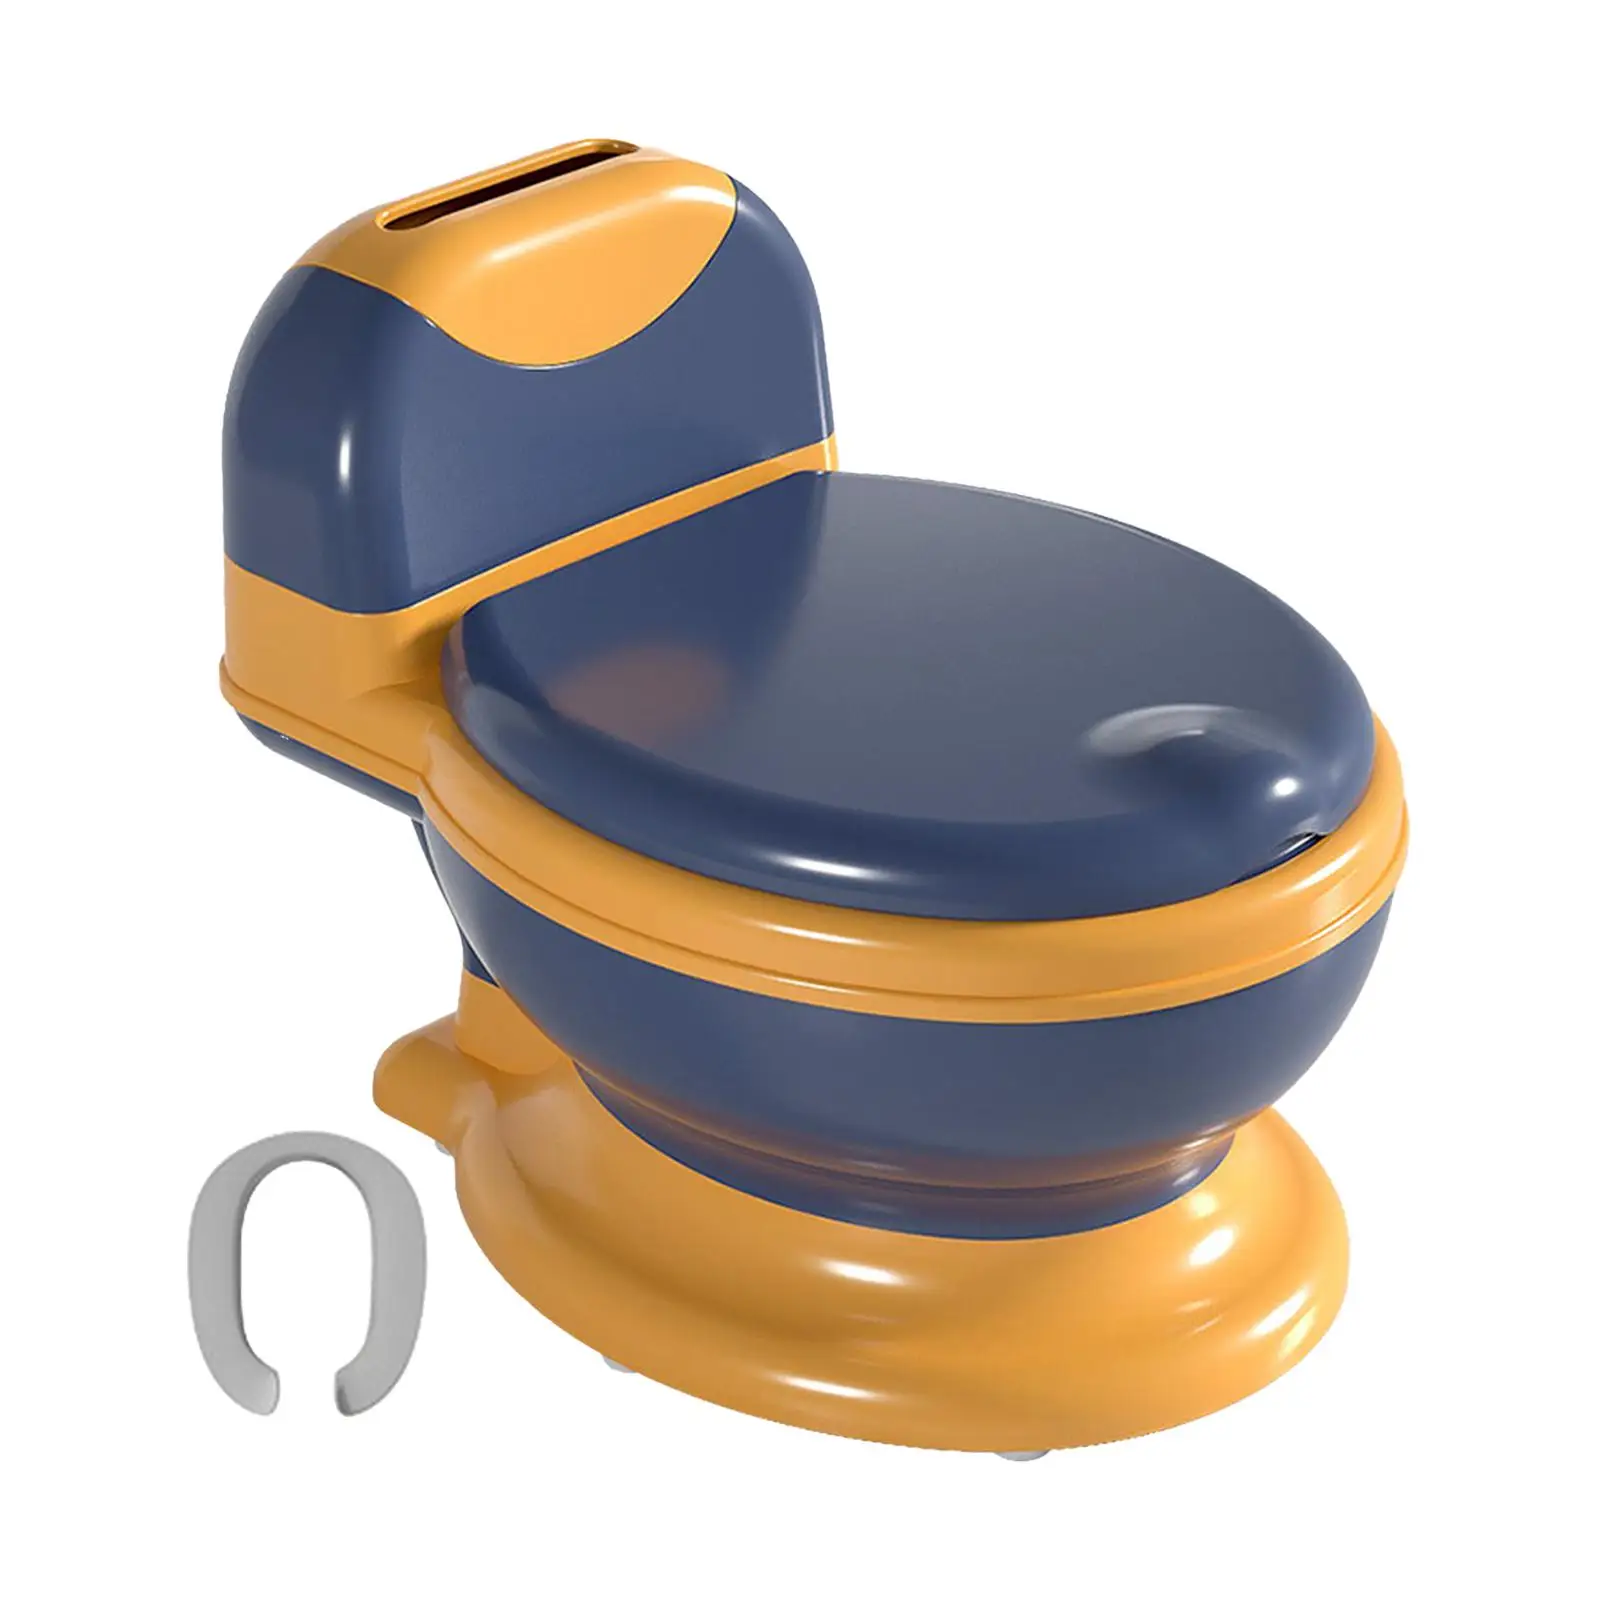 Potty Train Toilet Potty Train Seat Detachable Comfortable Realistic Toilet Toddlers Potty Chair for Boys Baby Kids Girls